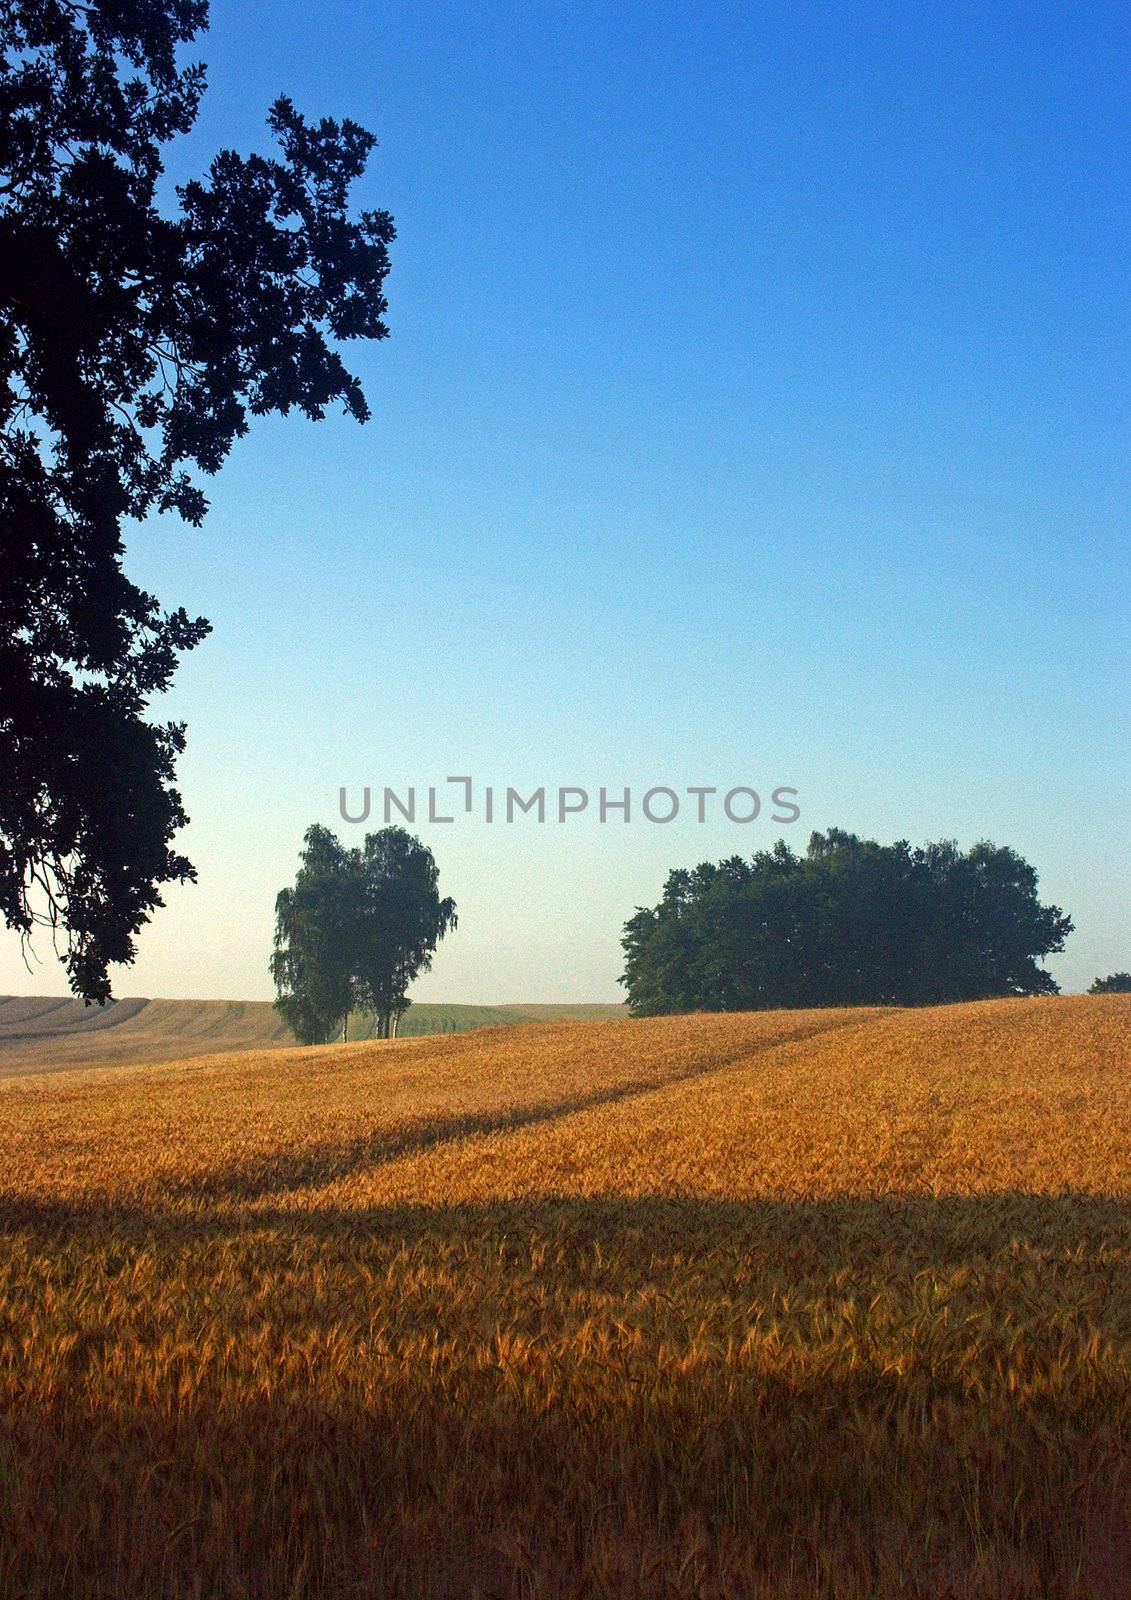 The beautiful fields of grain stretching under the blue sky